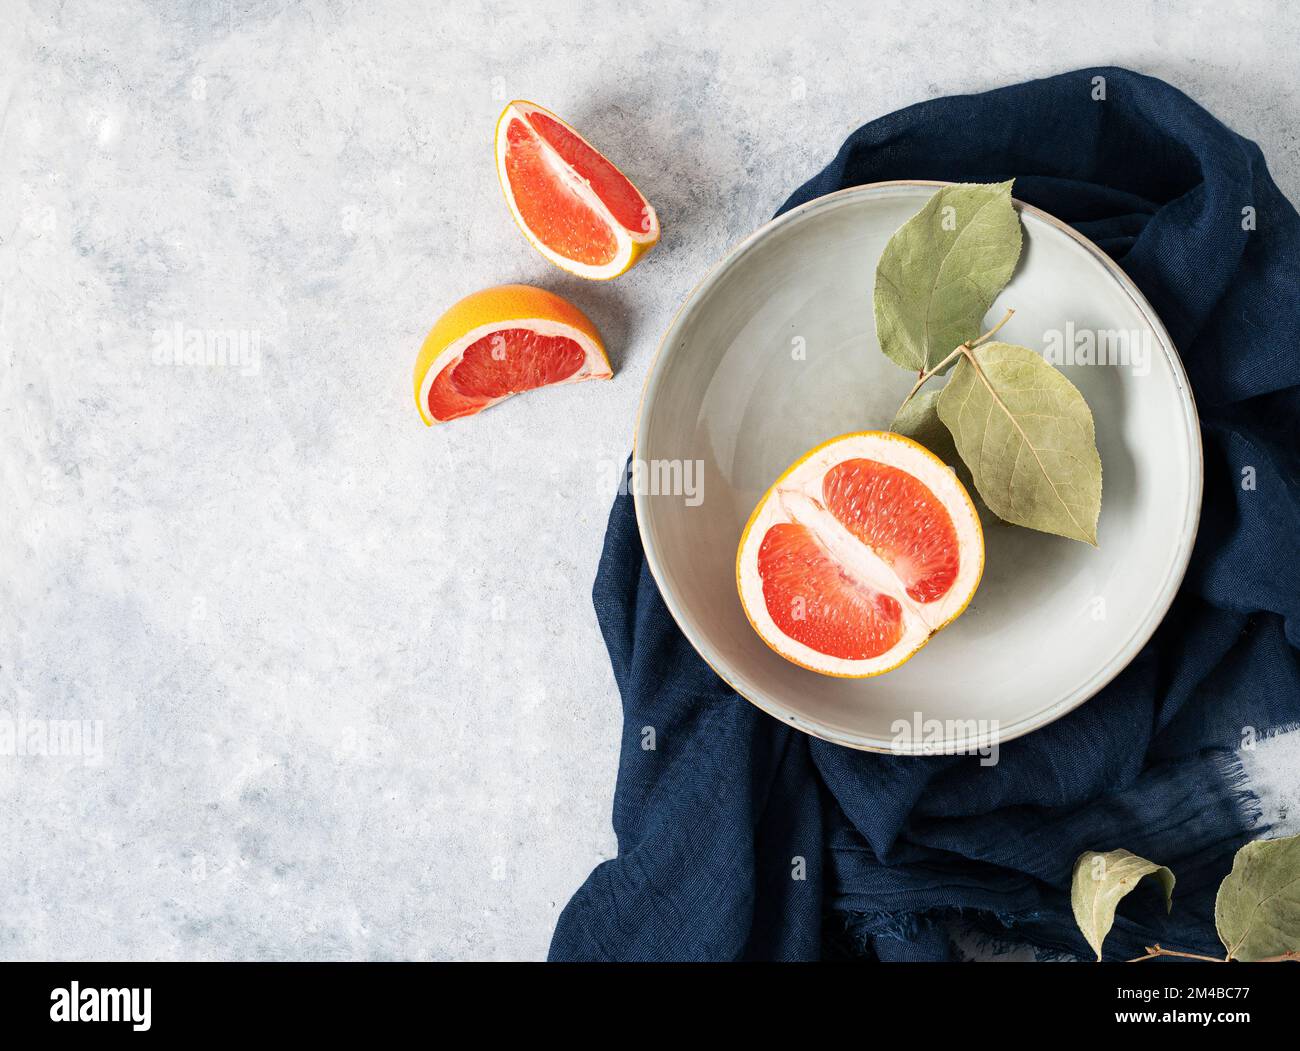 juicy red grapefruit in a plate and slices on a blue background with a dark napkin. Concept healthy food. Top view and copy space. Stock Photo